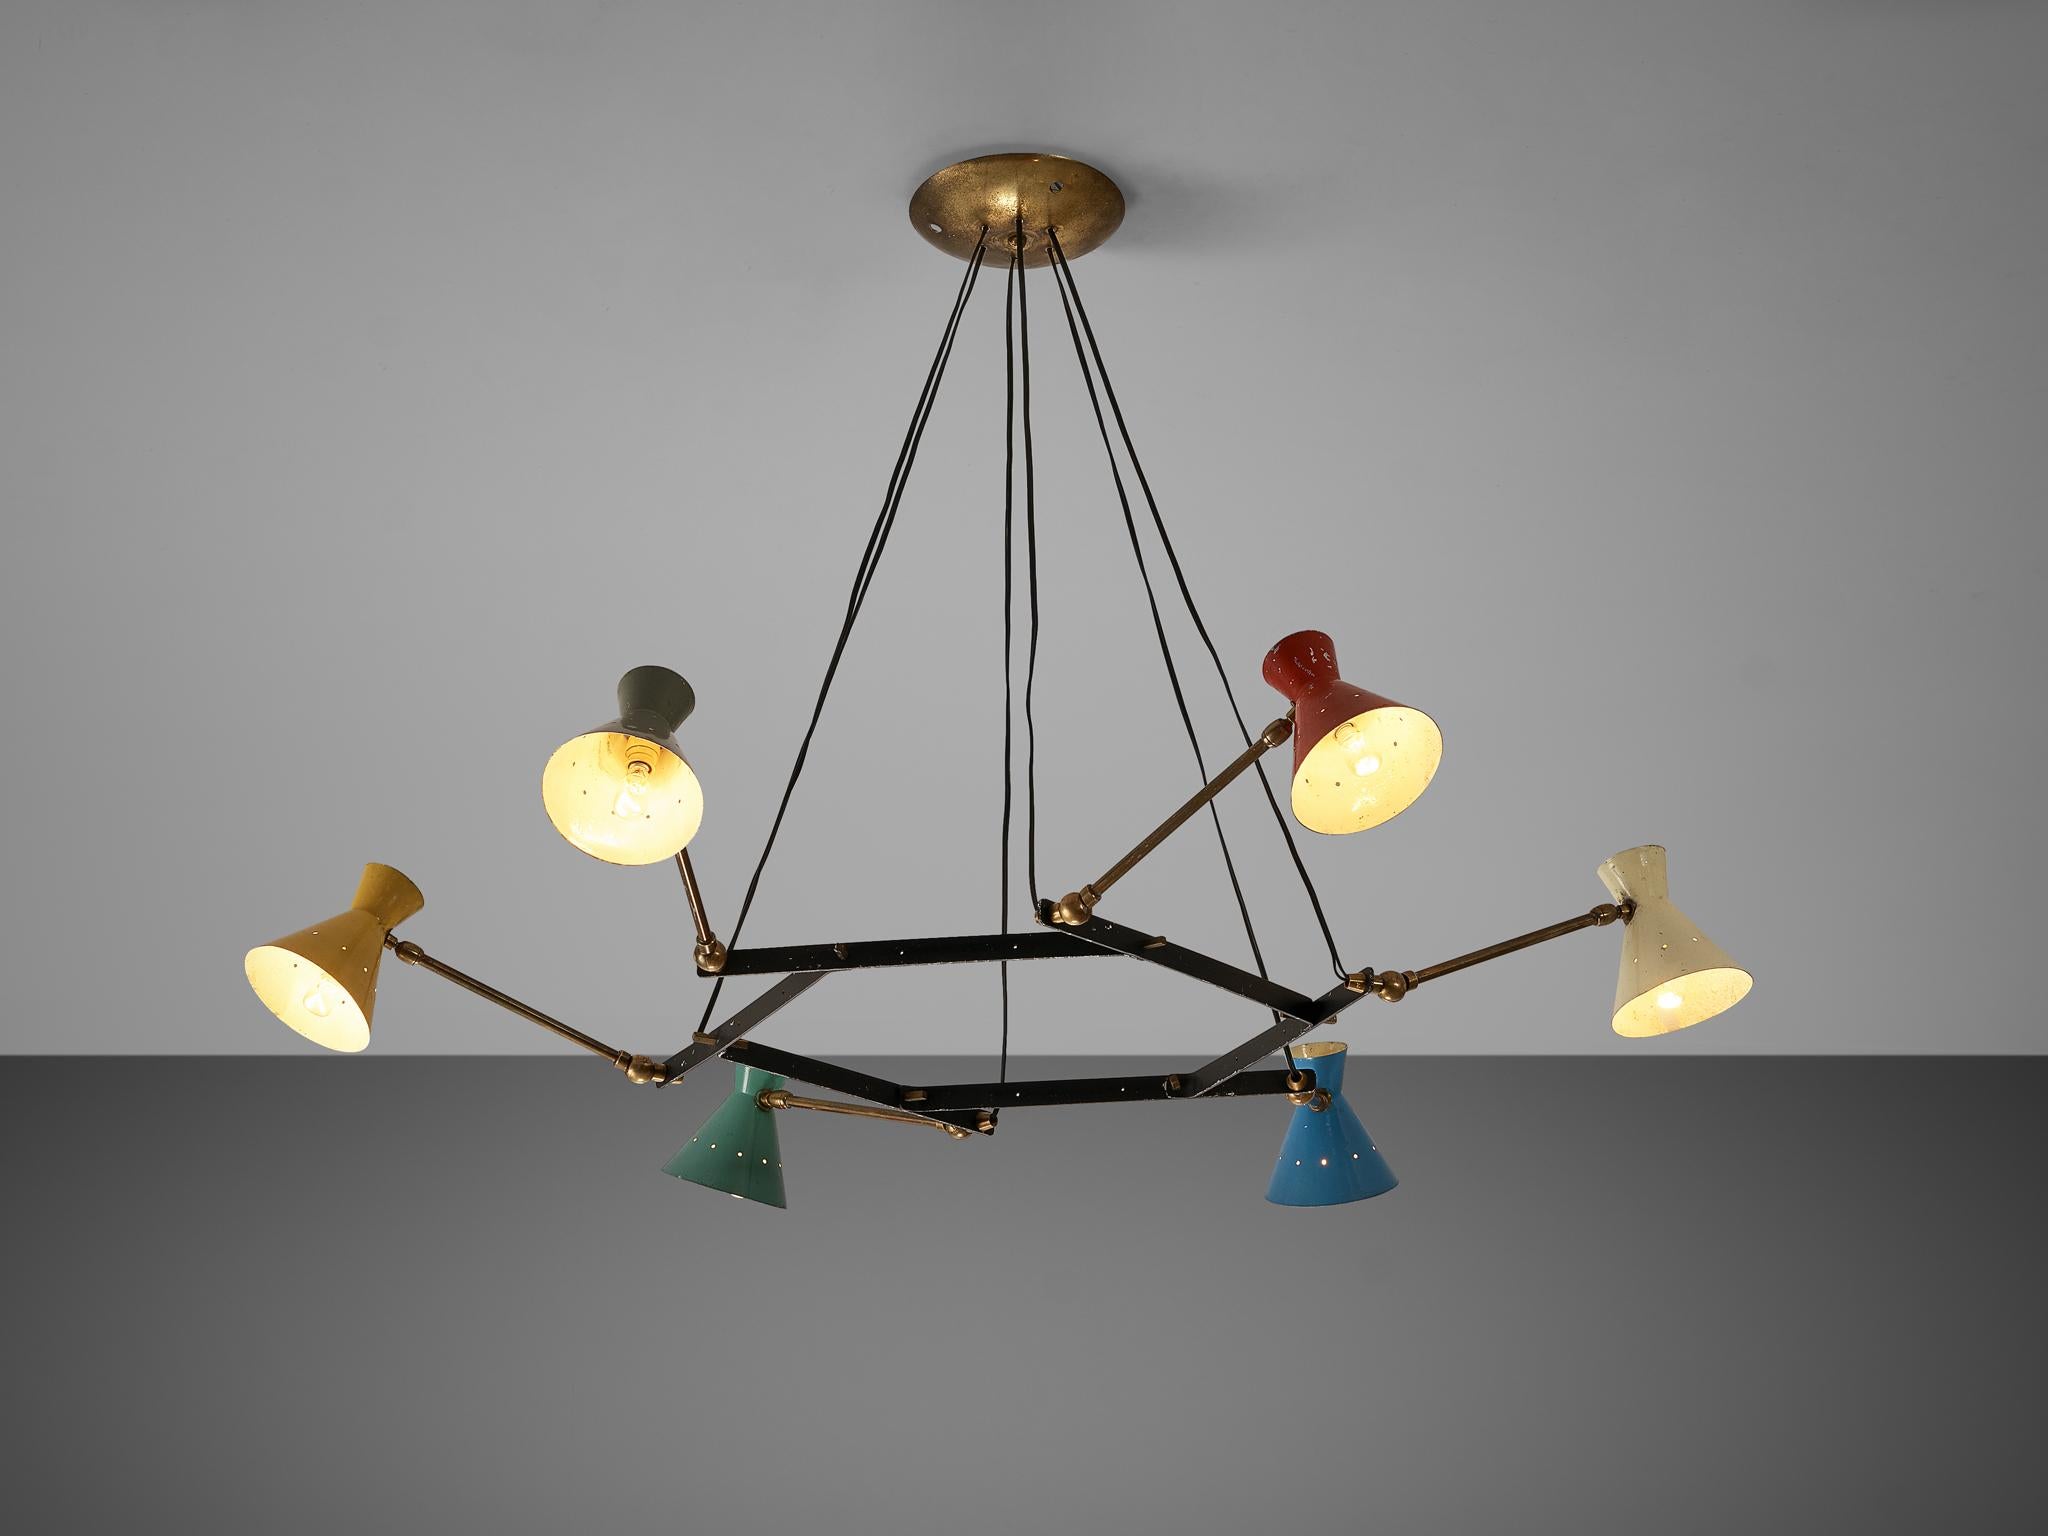 Chandelier, metal, brass, Italy, 1950s

Beautiful Italian chandelier with colorful cone shaped shades. A round brass fixture adjusts the lamp to the ceiling. Six wires connect the ceiling fixture with the lamps. A polygonal frame in metal holds